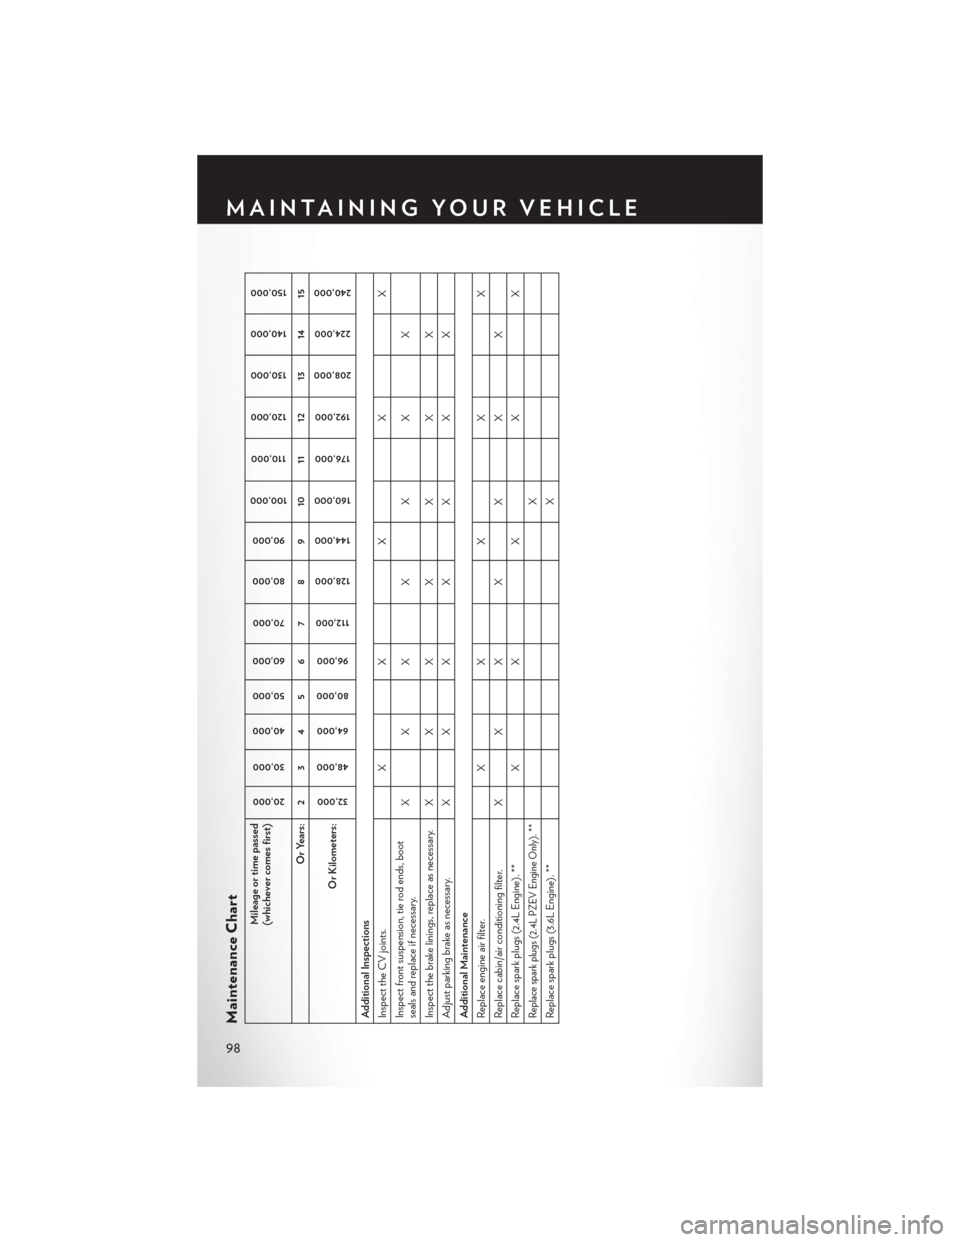 CHRYSLER 200 2014 1.G User Guide Maintenance Chart
Mileage or time passed
(whichever comes first)
20,000
30,000
40,000 50,000
60,000
70,000
80,000 90,000
100,000
110,000
120,000 130,000
140,000 150,000
Or Years: 2 3 4 5 6 7 8 9 10 11